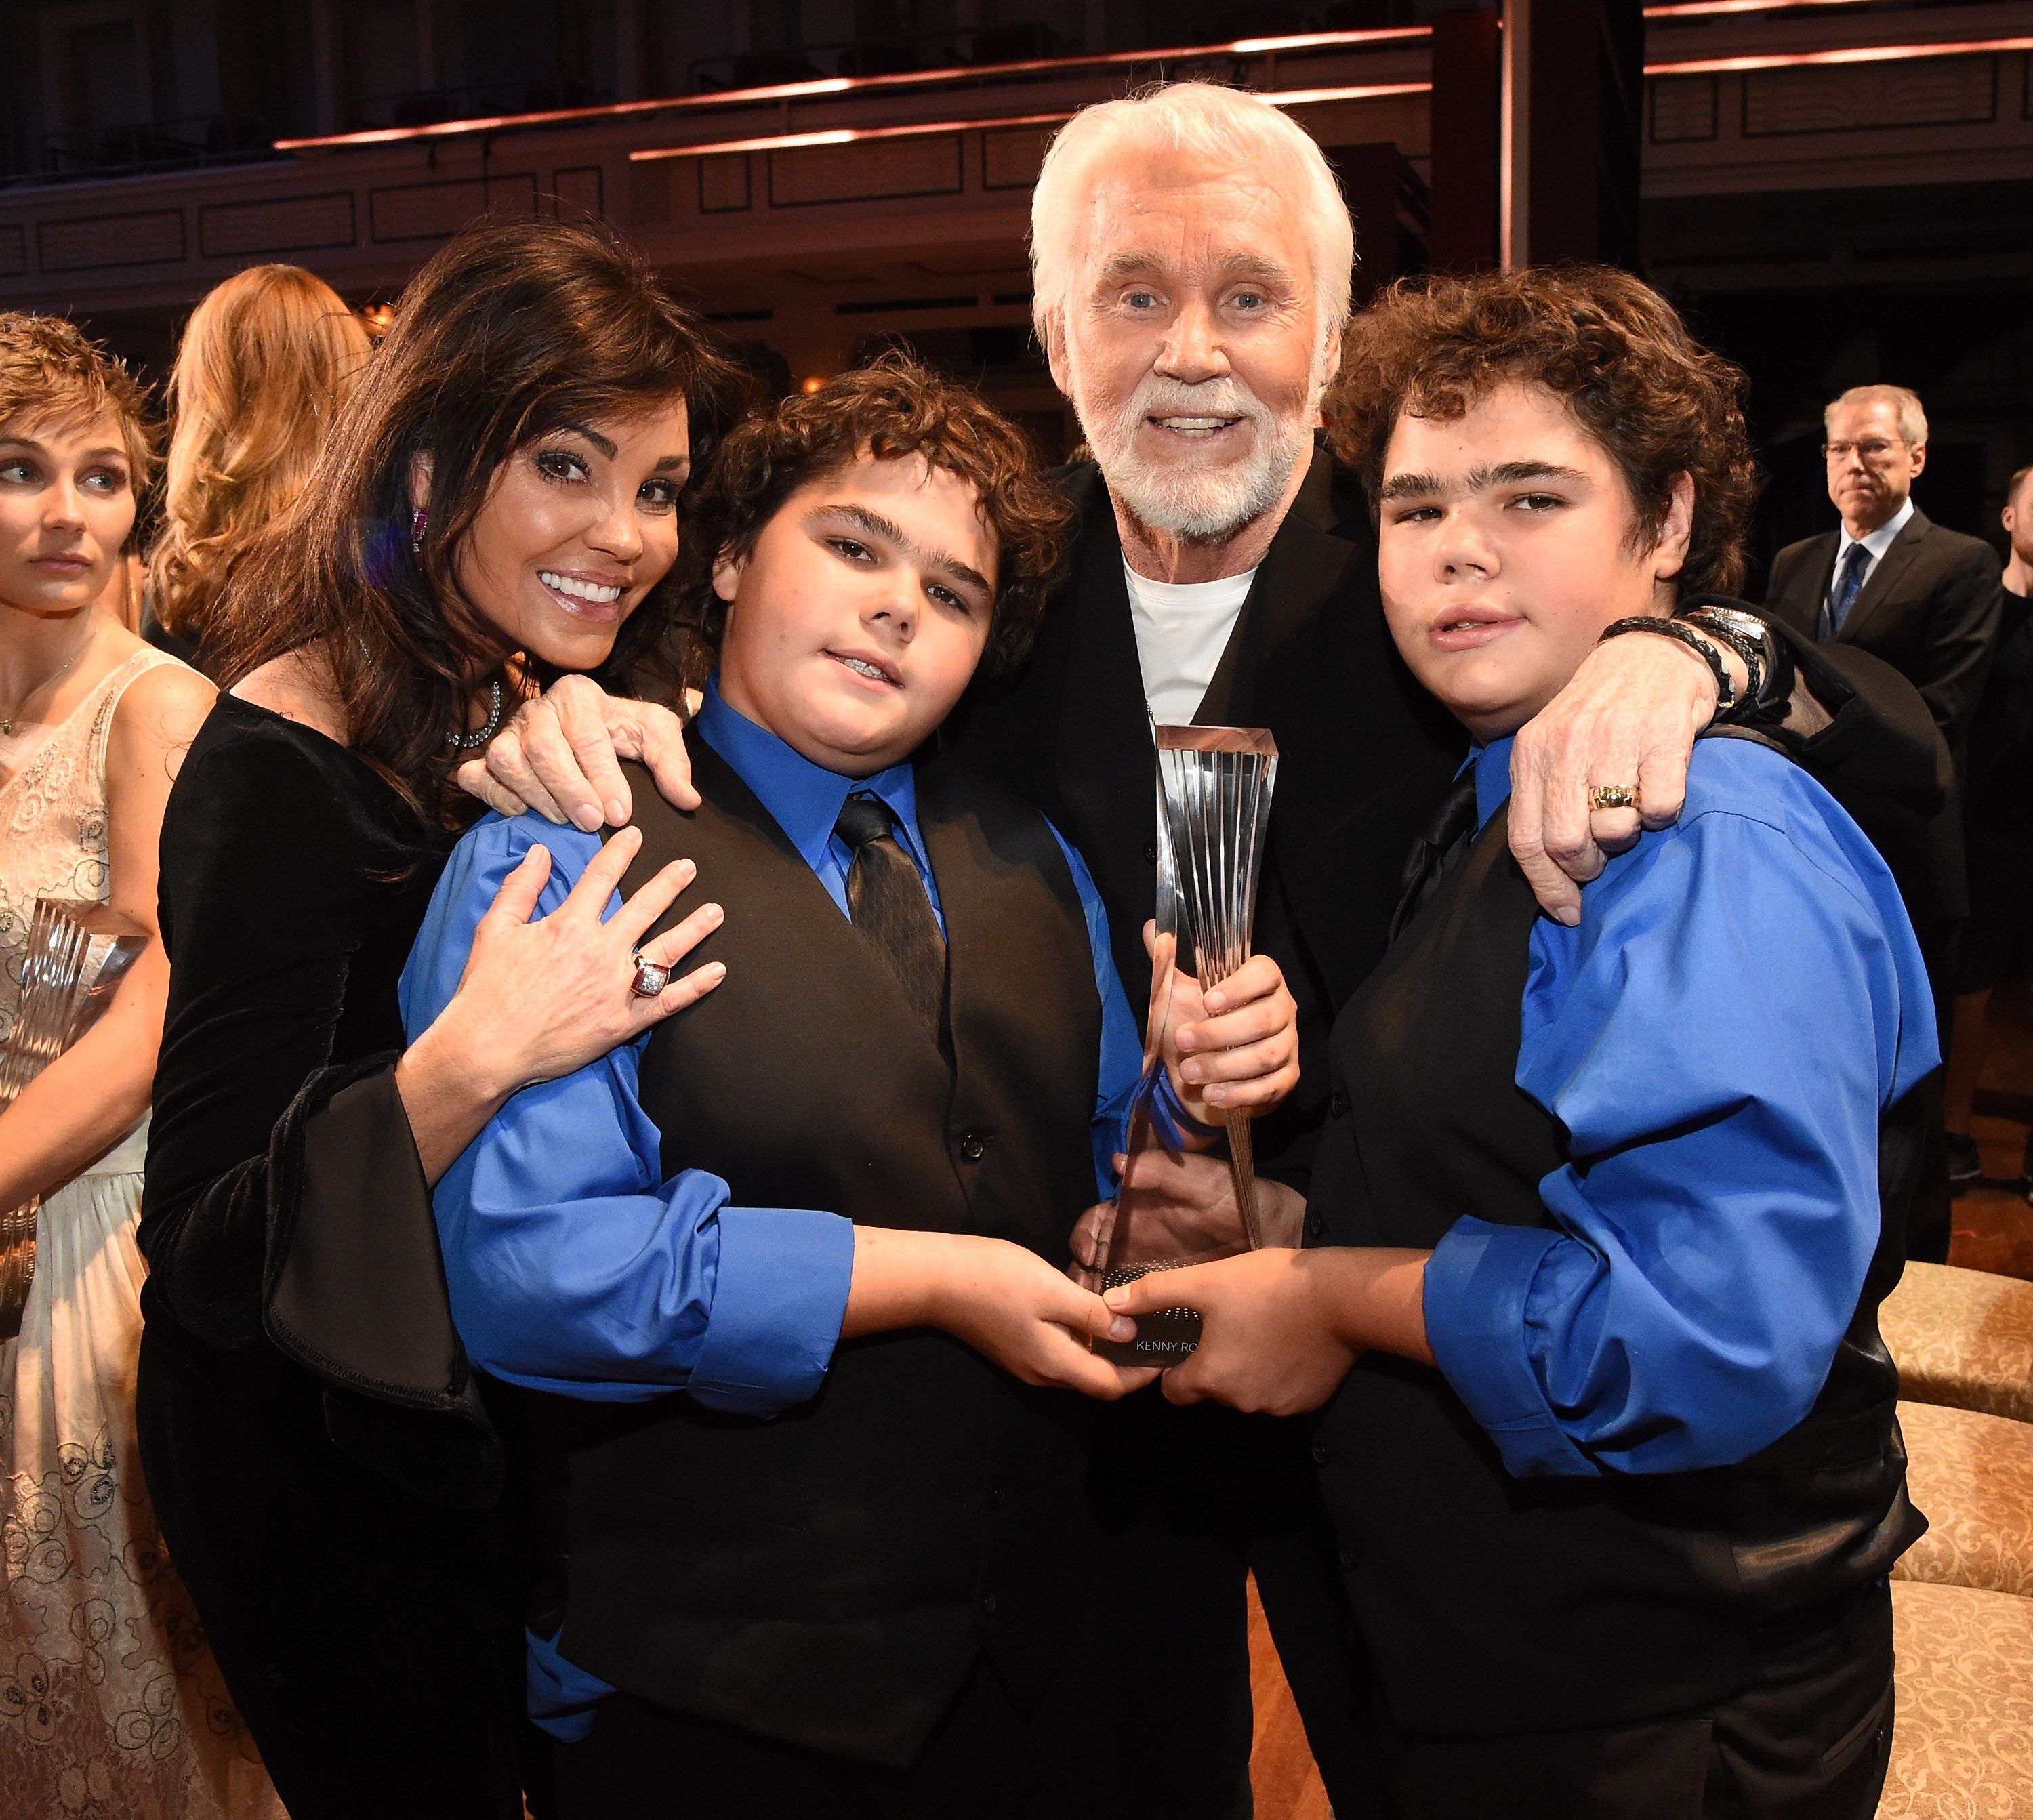 Wanda Miller, Kenny Rogers, and their sons |  Rick Diamond/Getty Images for CMT